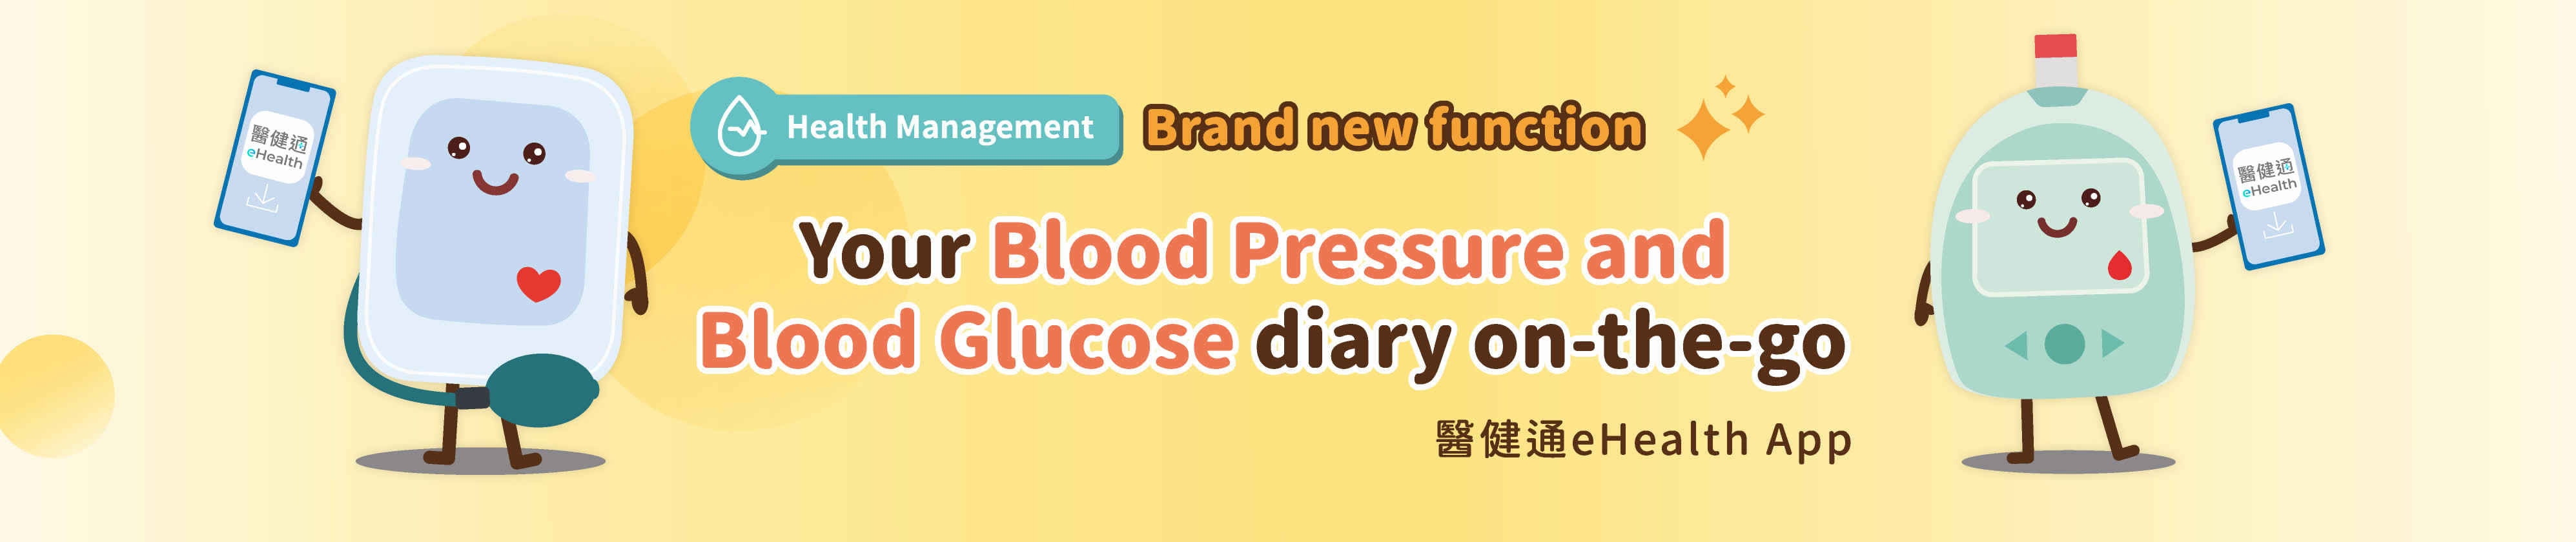 Health Management Brand new function - Your Blood Pressure and Blood Glucose diary on-the-go